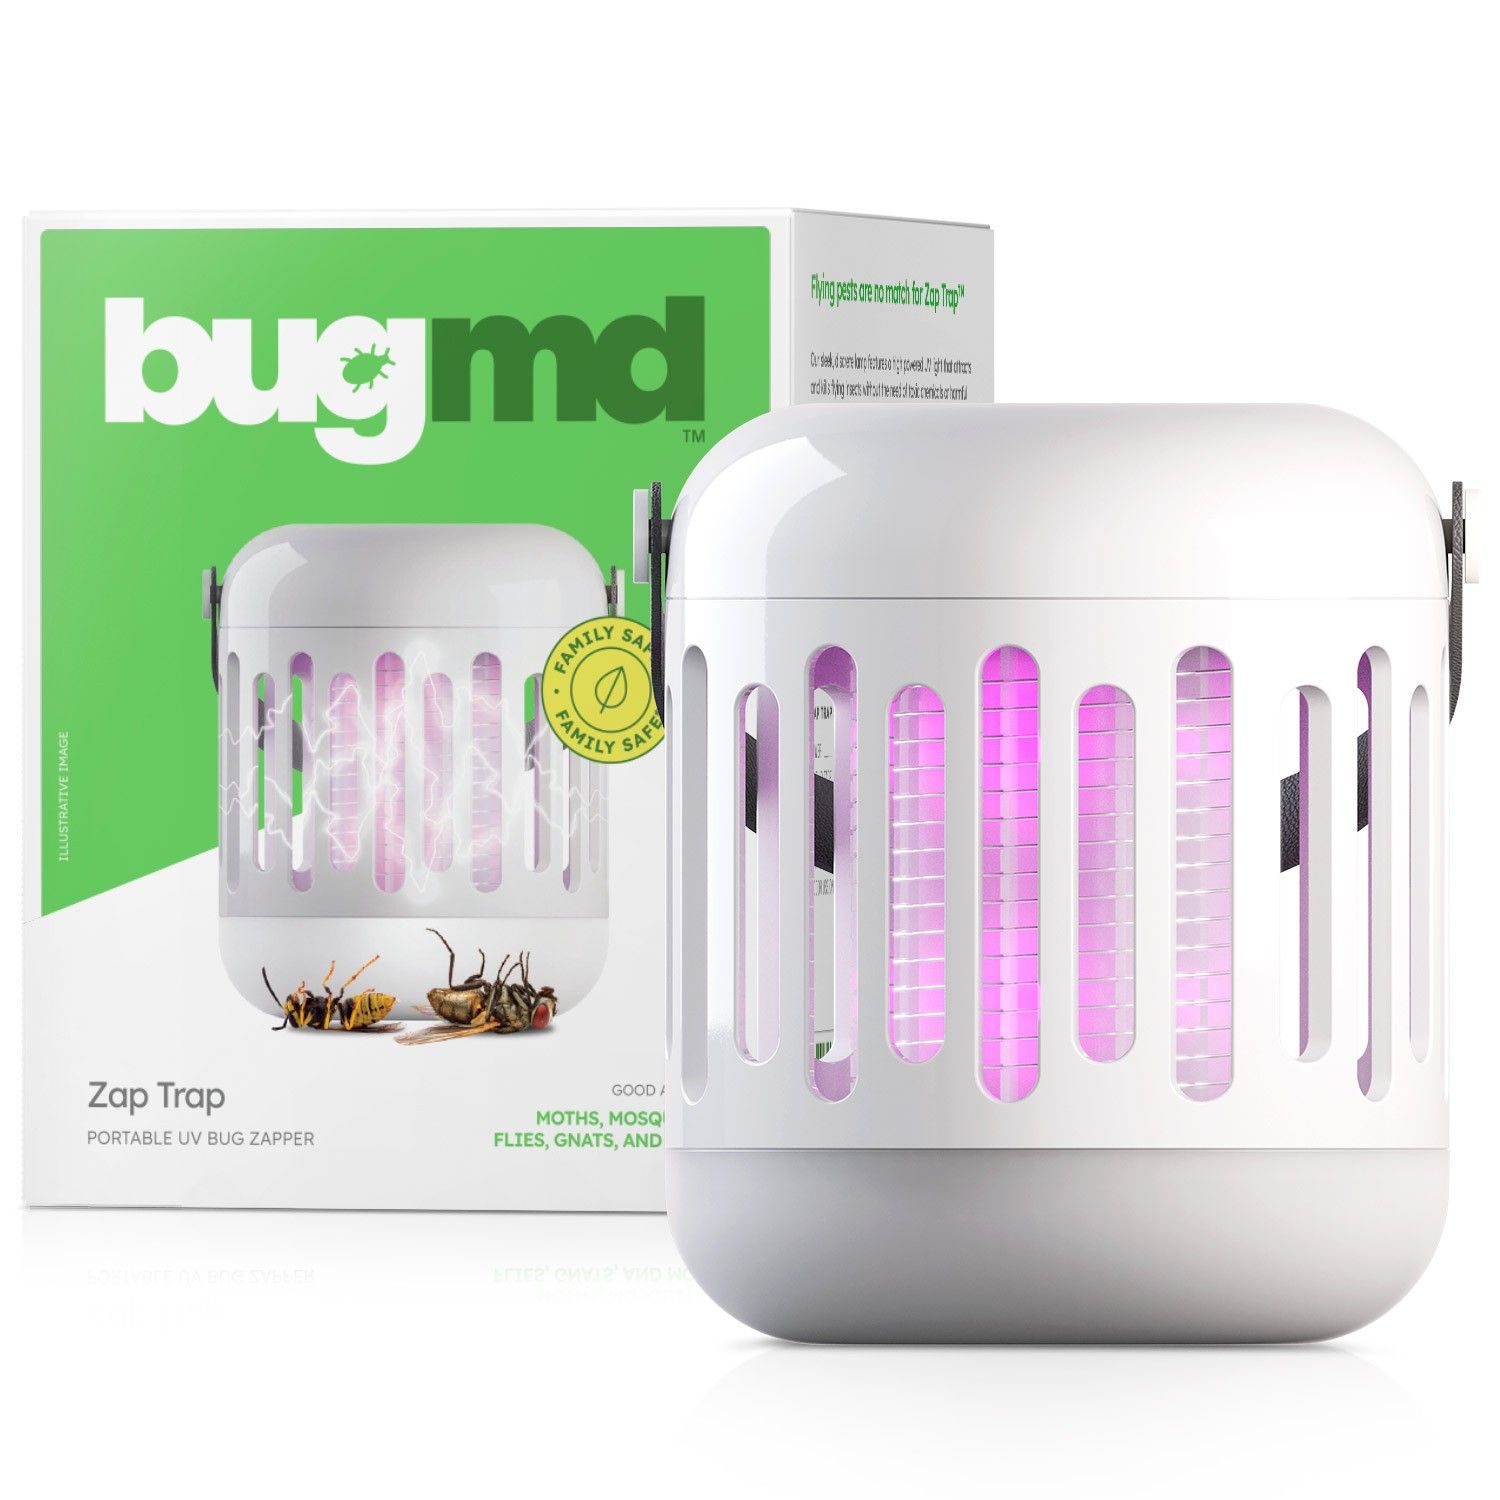 How To Use Pest Trapper – bugmd